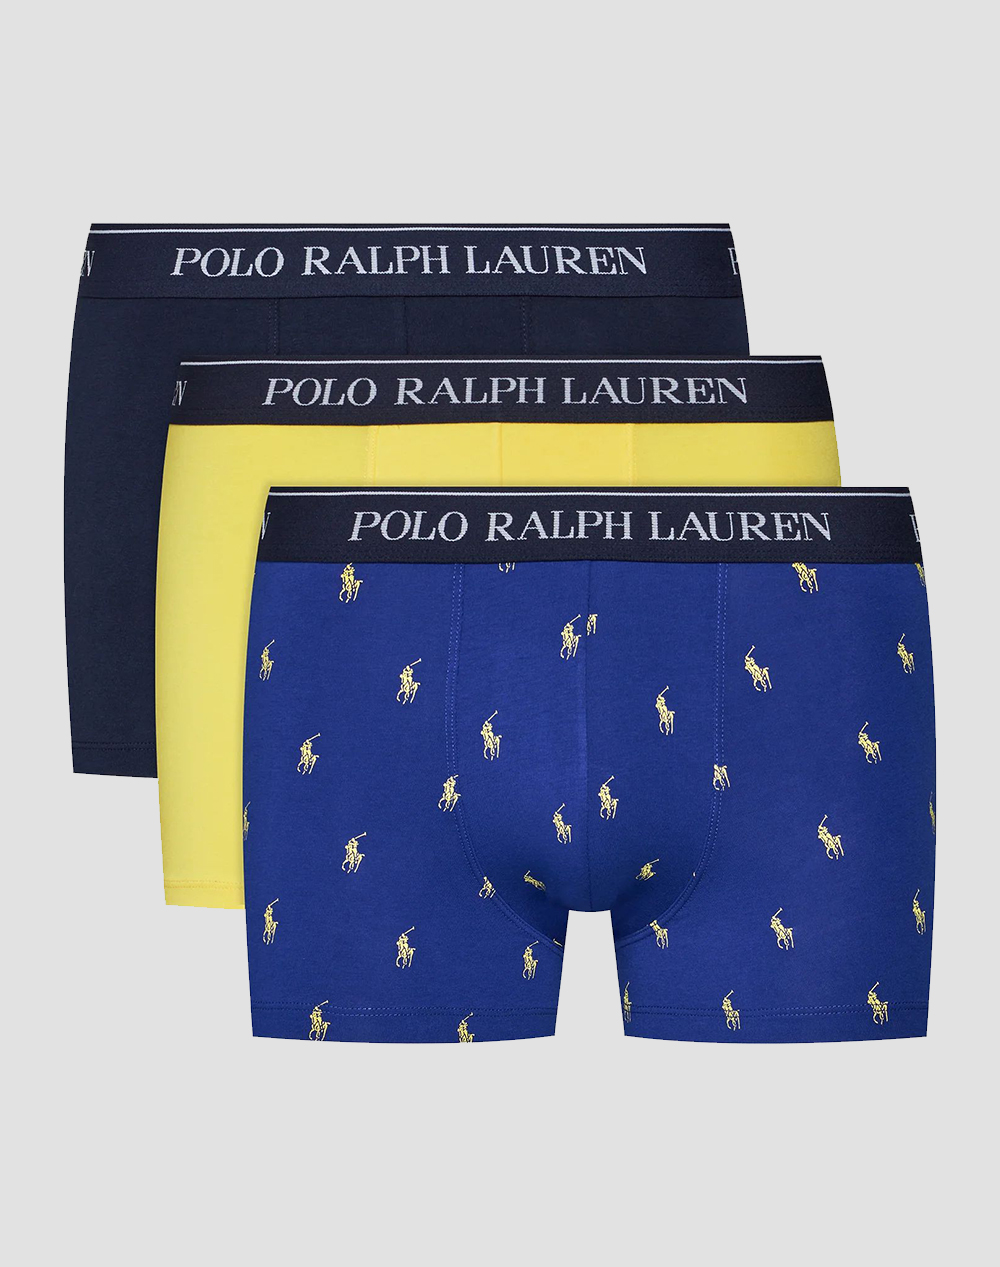 POLO RALPH LAUREN ΜΠΟΞΕΡ BCI CLSSIC TRUNK-3 PACK-TRUNK 714830299-118 Yellow 0420APOLO1320009_XR28010